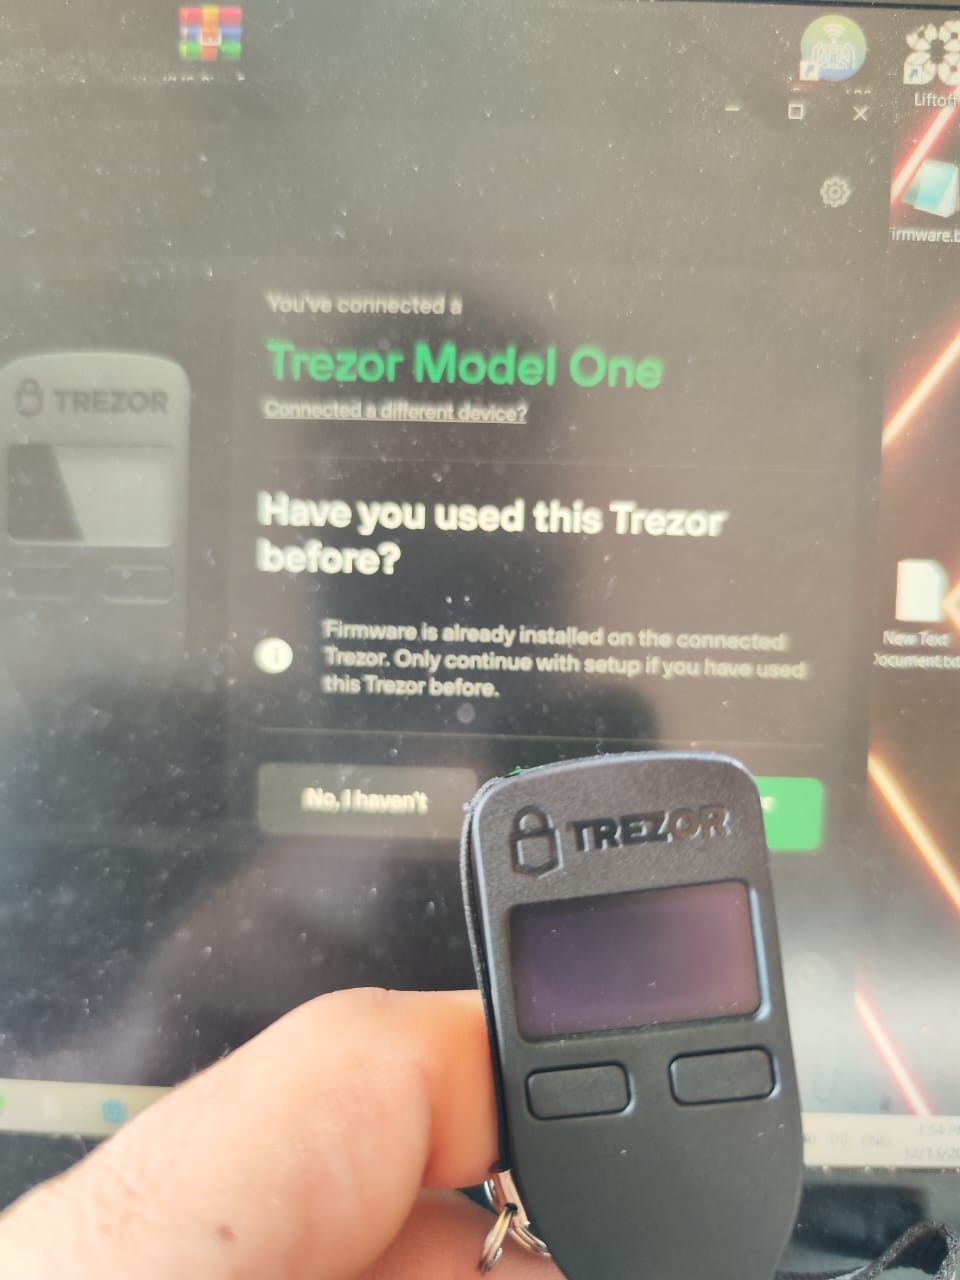 How to connect the Trezor hardware wallet to 1inch Network | cryptolive.fun - Help Center